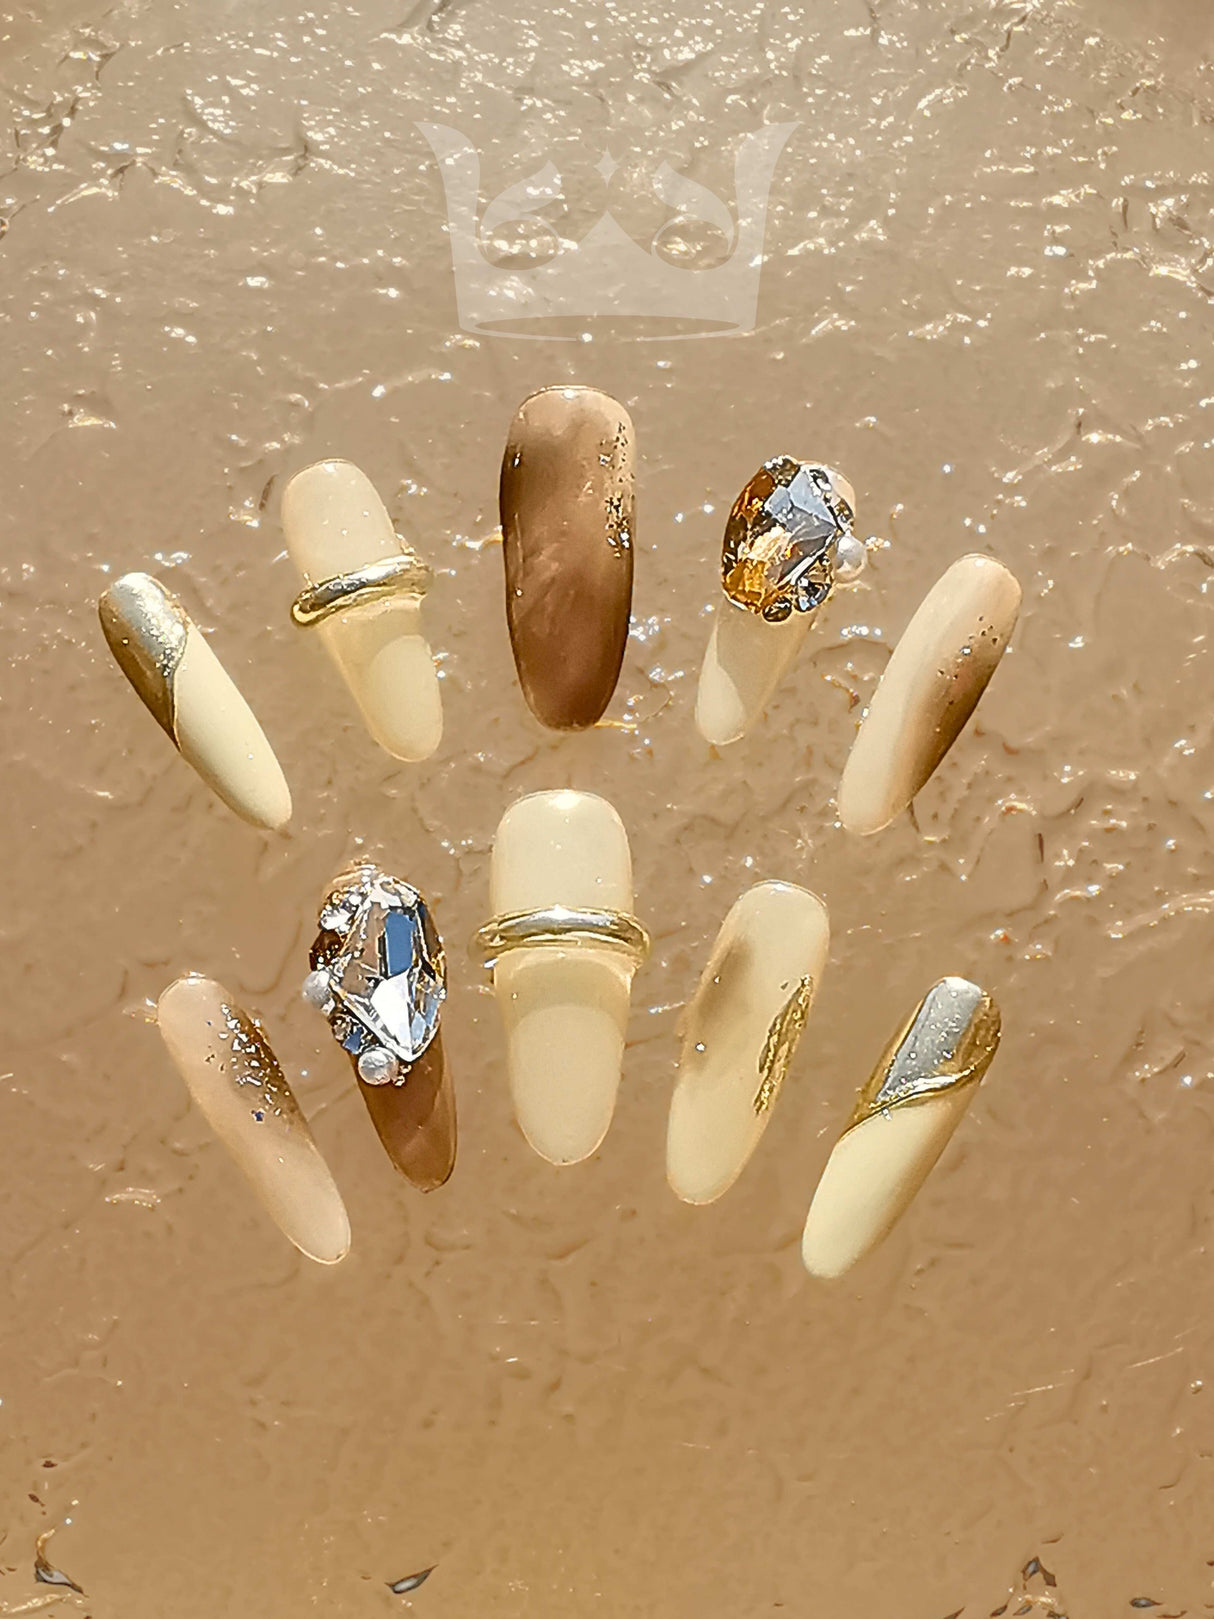 Sophisticated and elegant nails with metallic accents, rhinestones, glitter, and glossy finish. Suitable for special occasions or statement nail design.